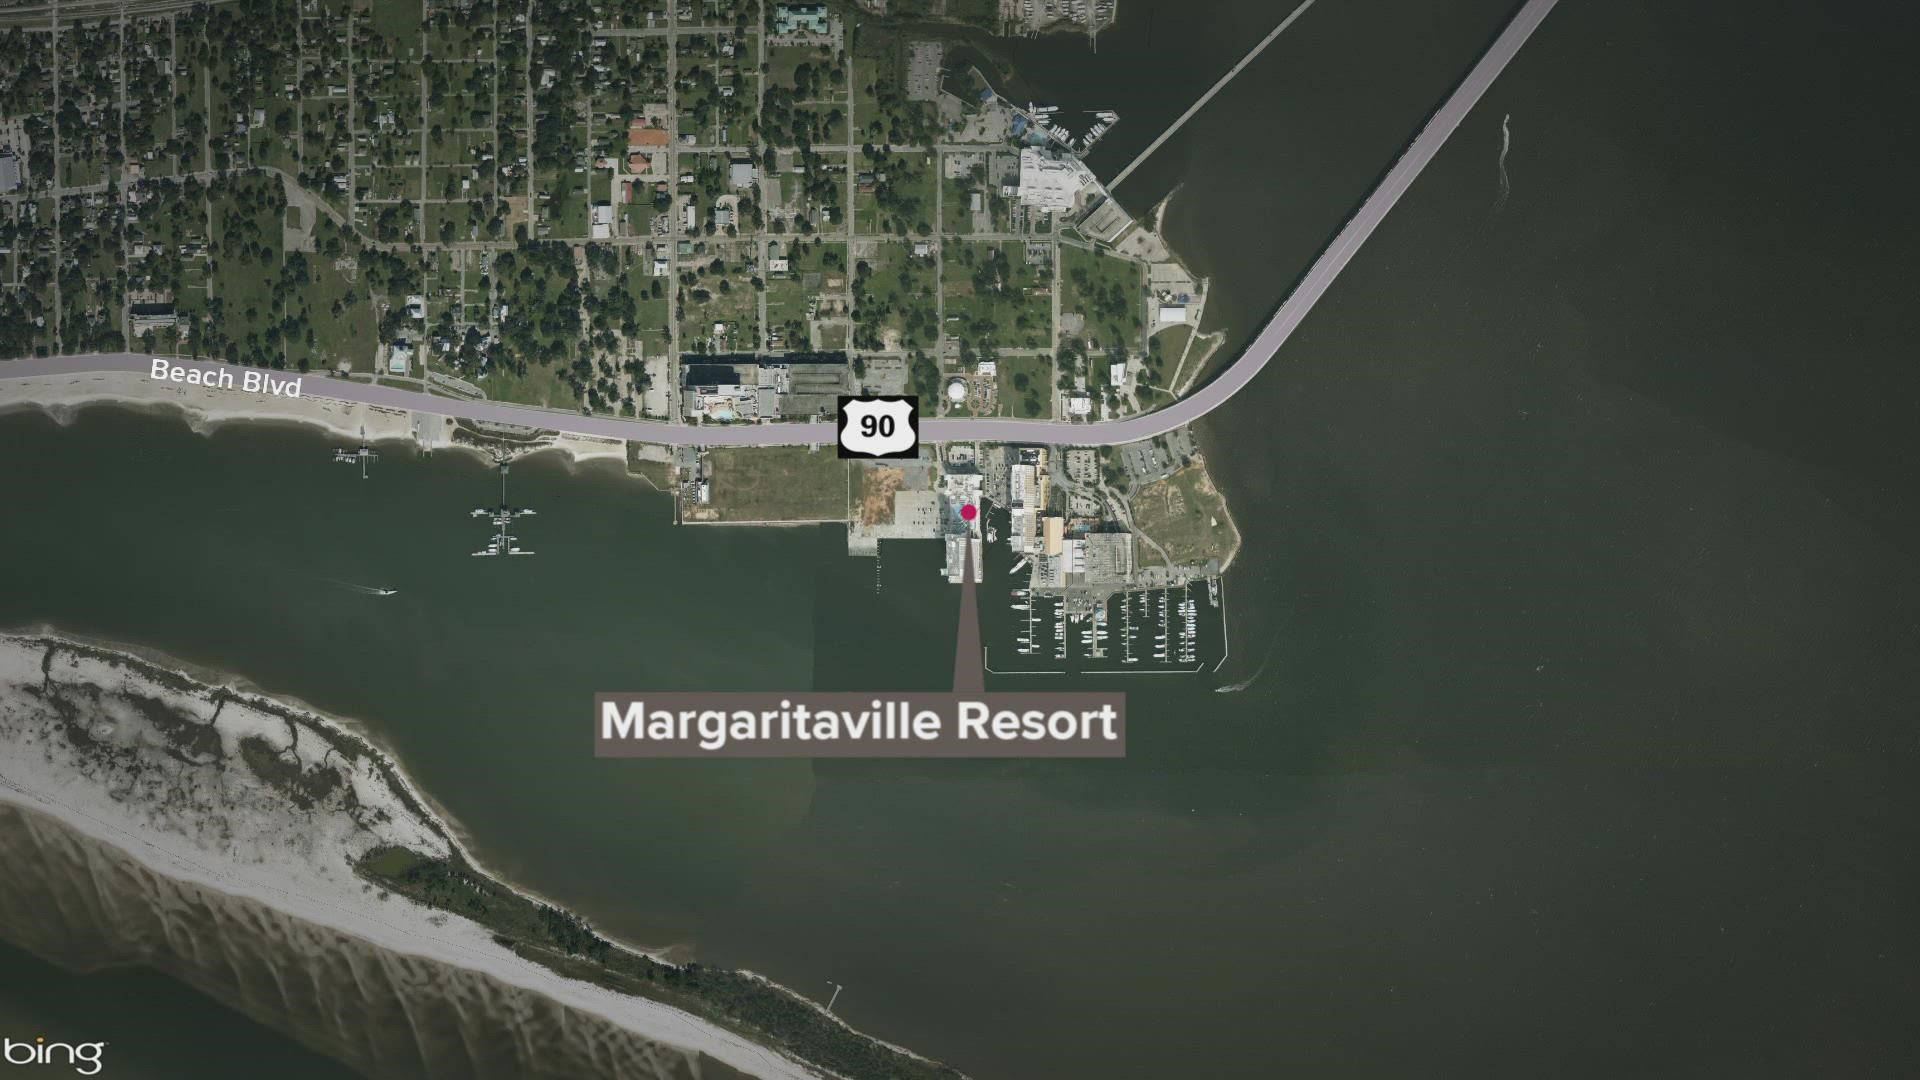 A 2-year-old child drowned in a swimming pool during a family vacation at Margaritaville Resort Biloxi on Sunday afternoon.